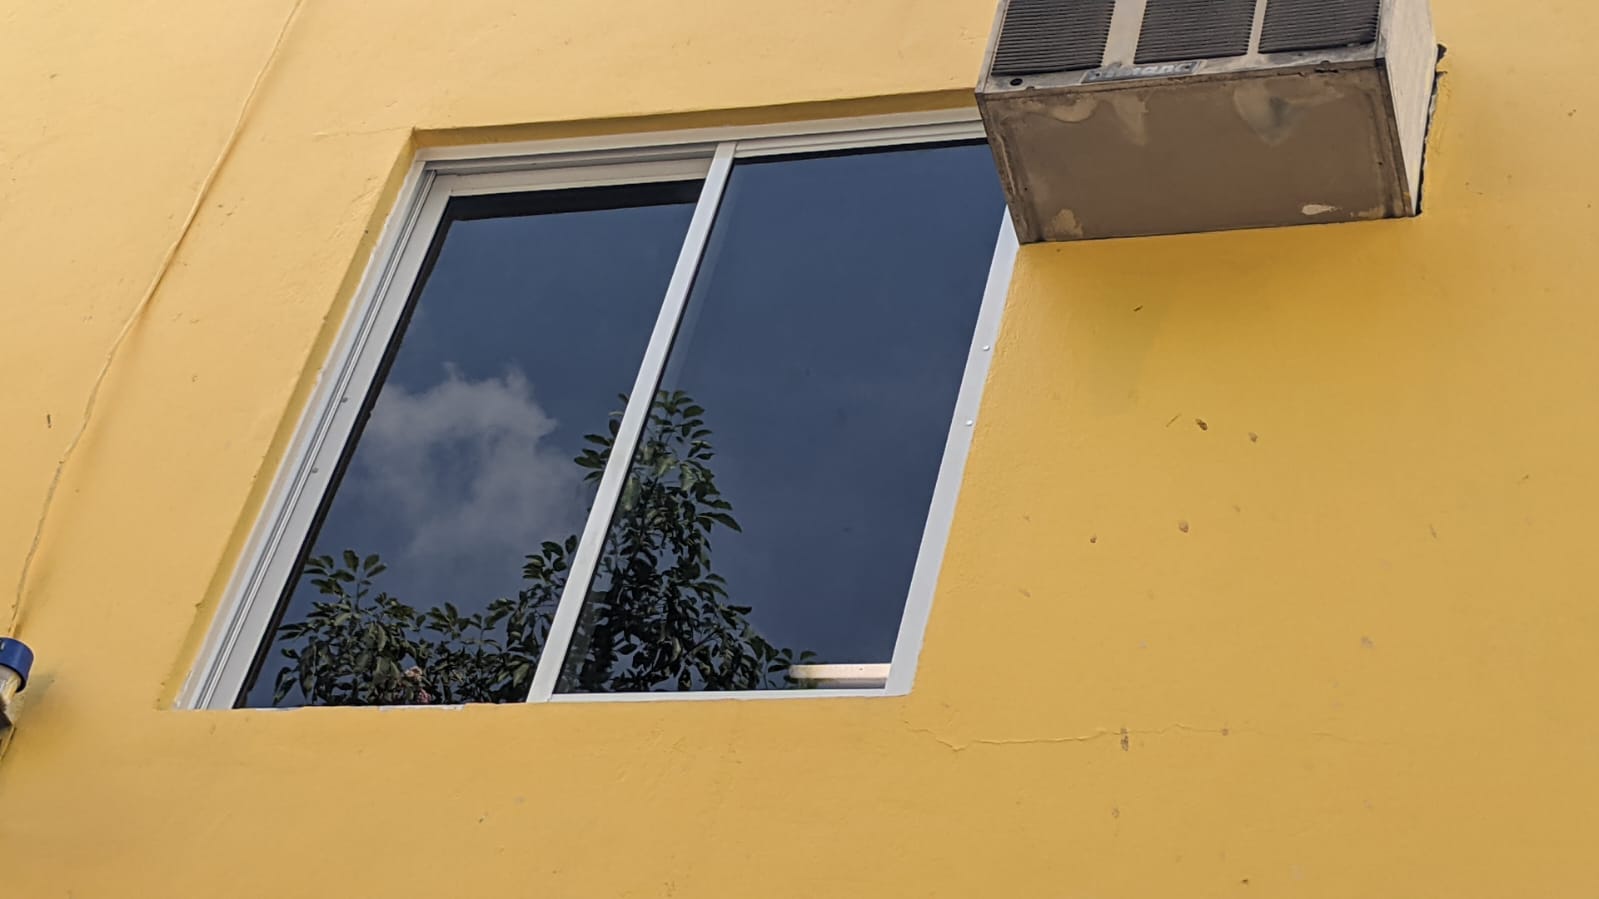    A REPLACED WINDOW